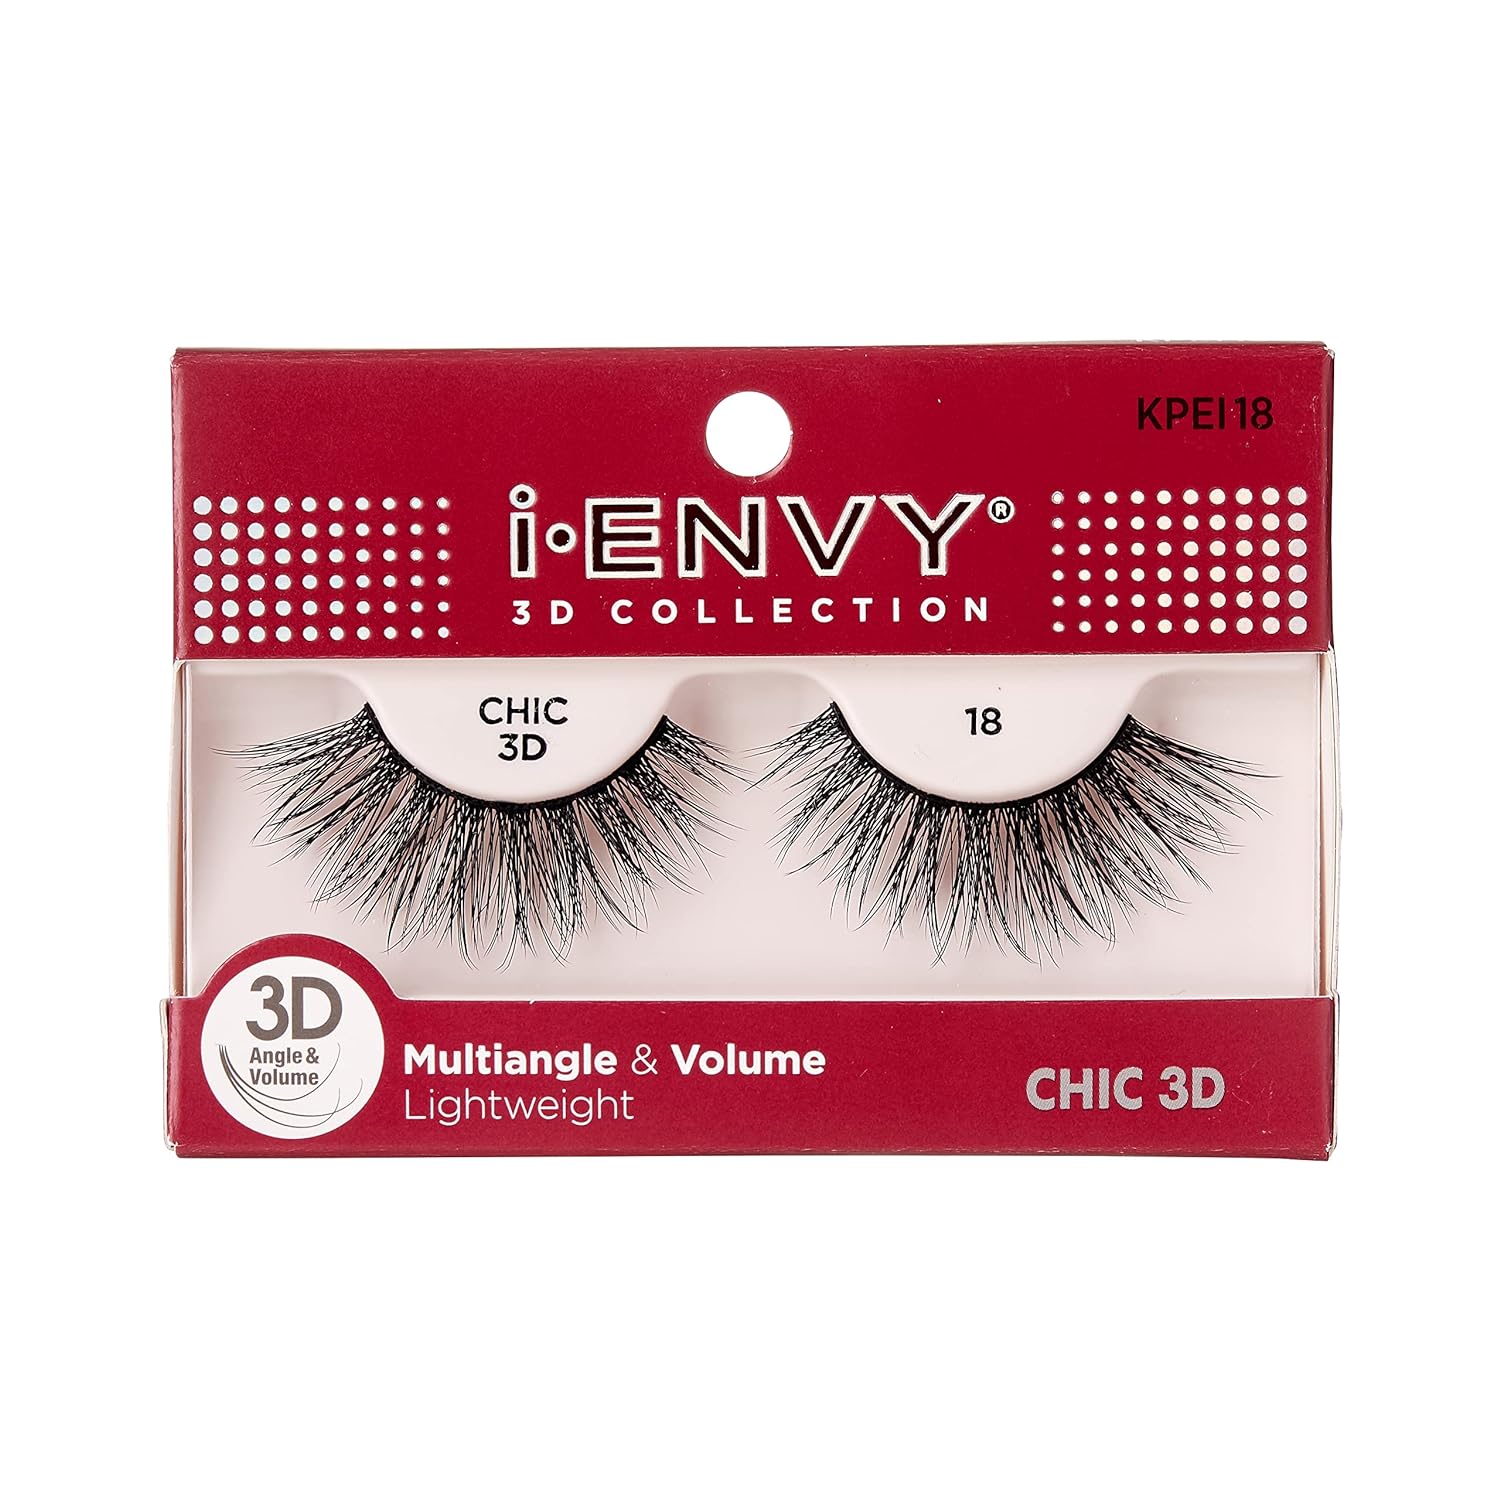 iENVY by KISS Lash Chic Collection Review